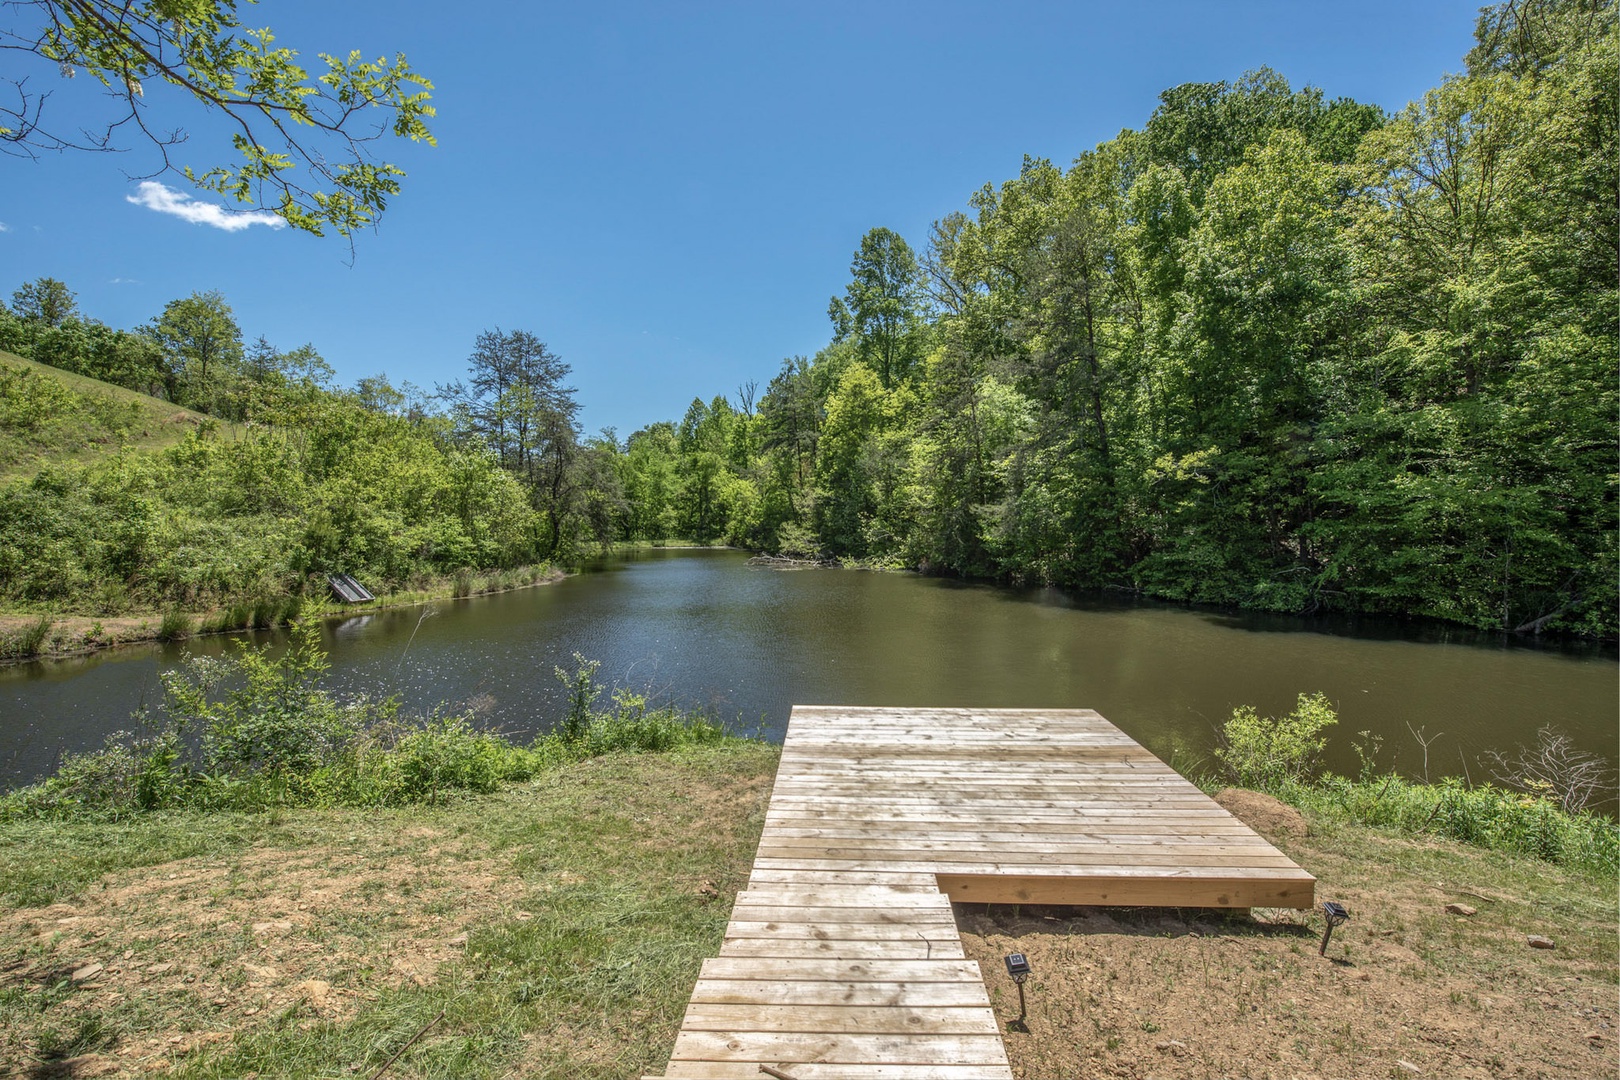 Direct access to private lake. No fishing license required.